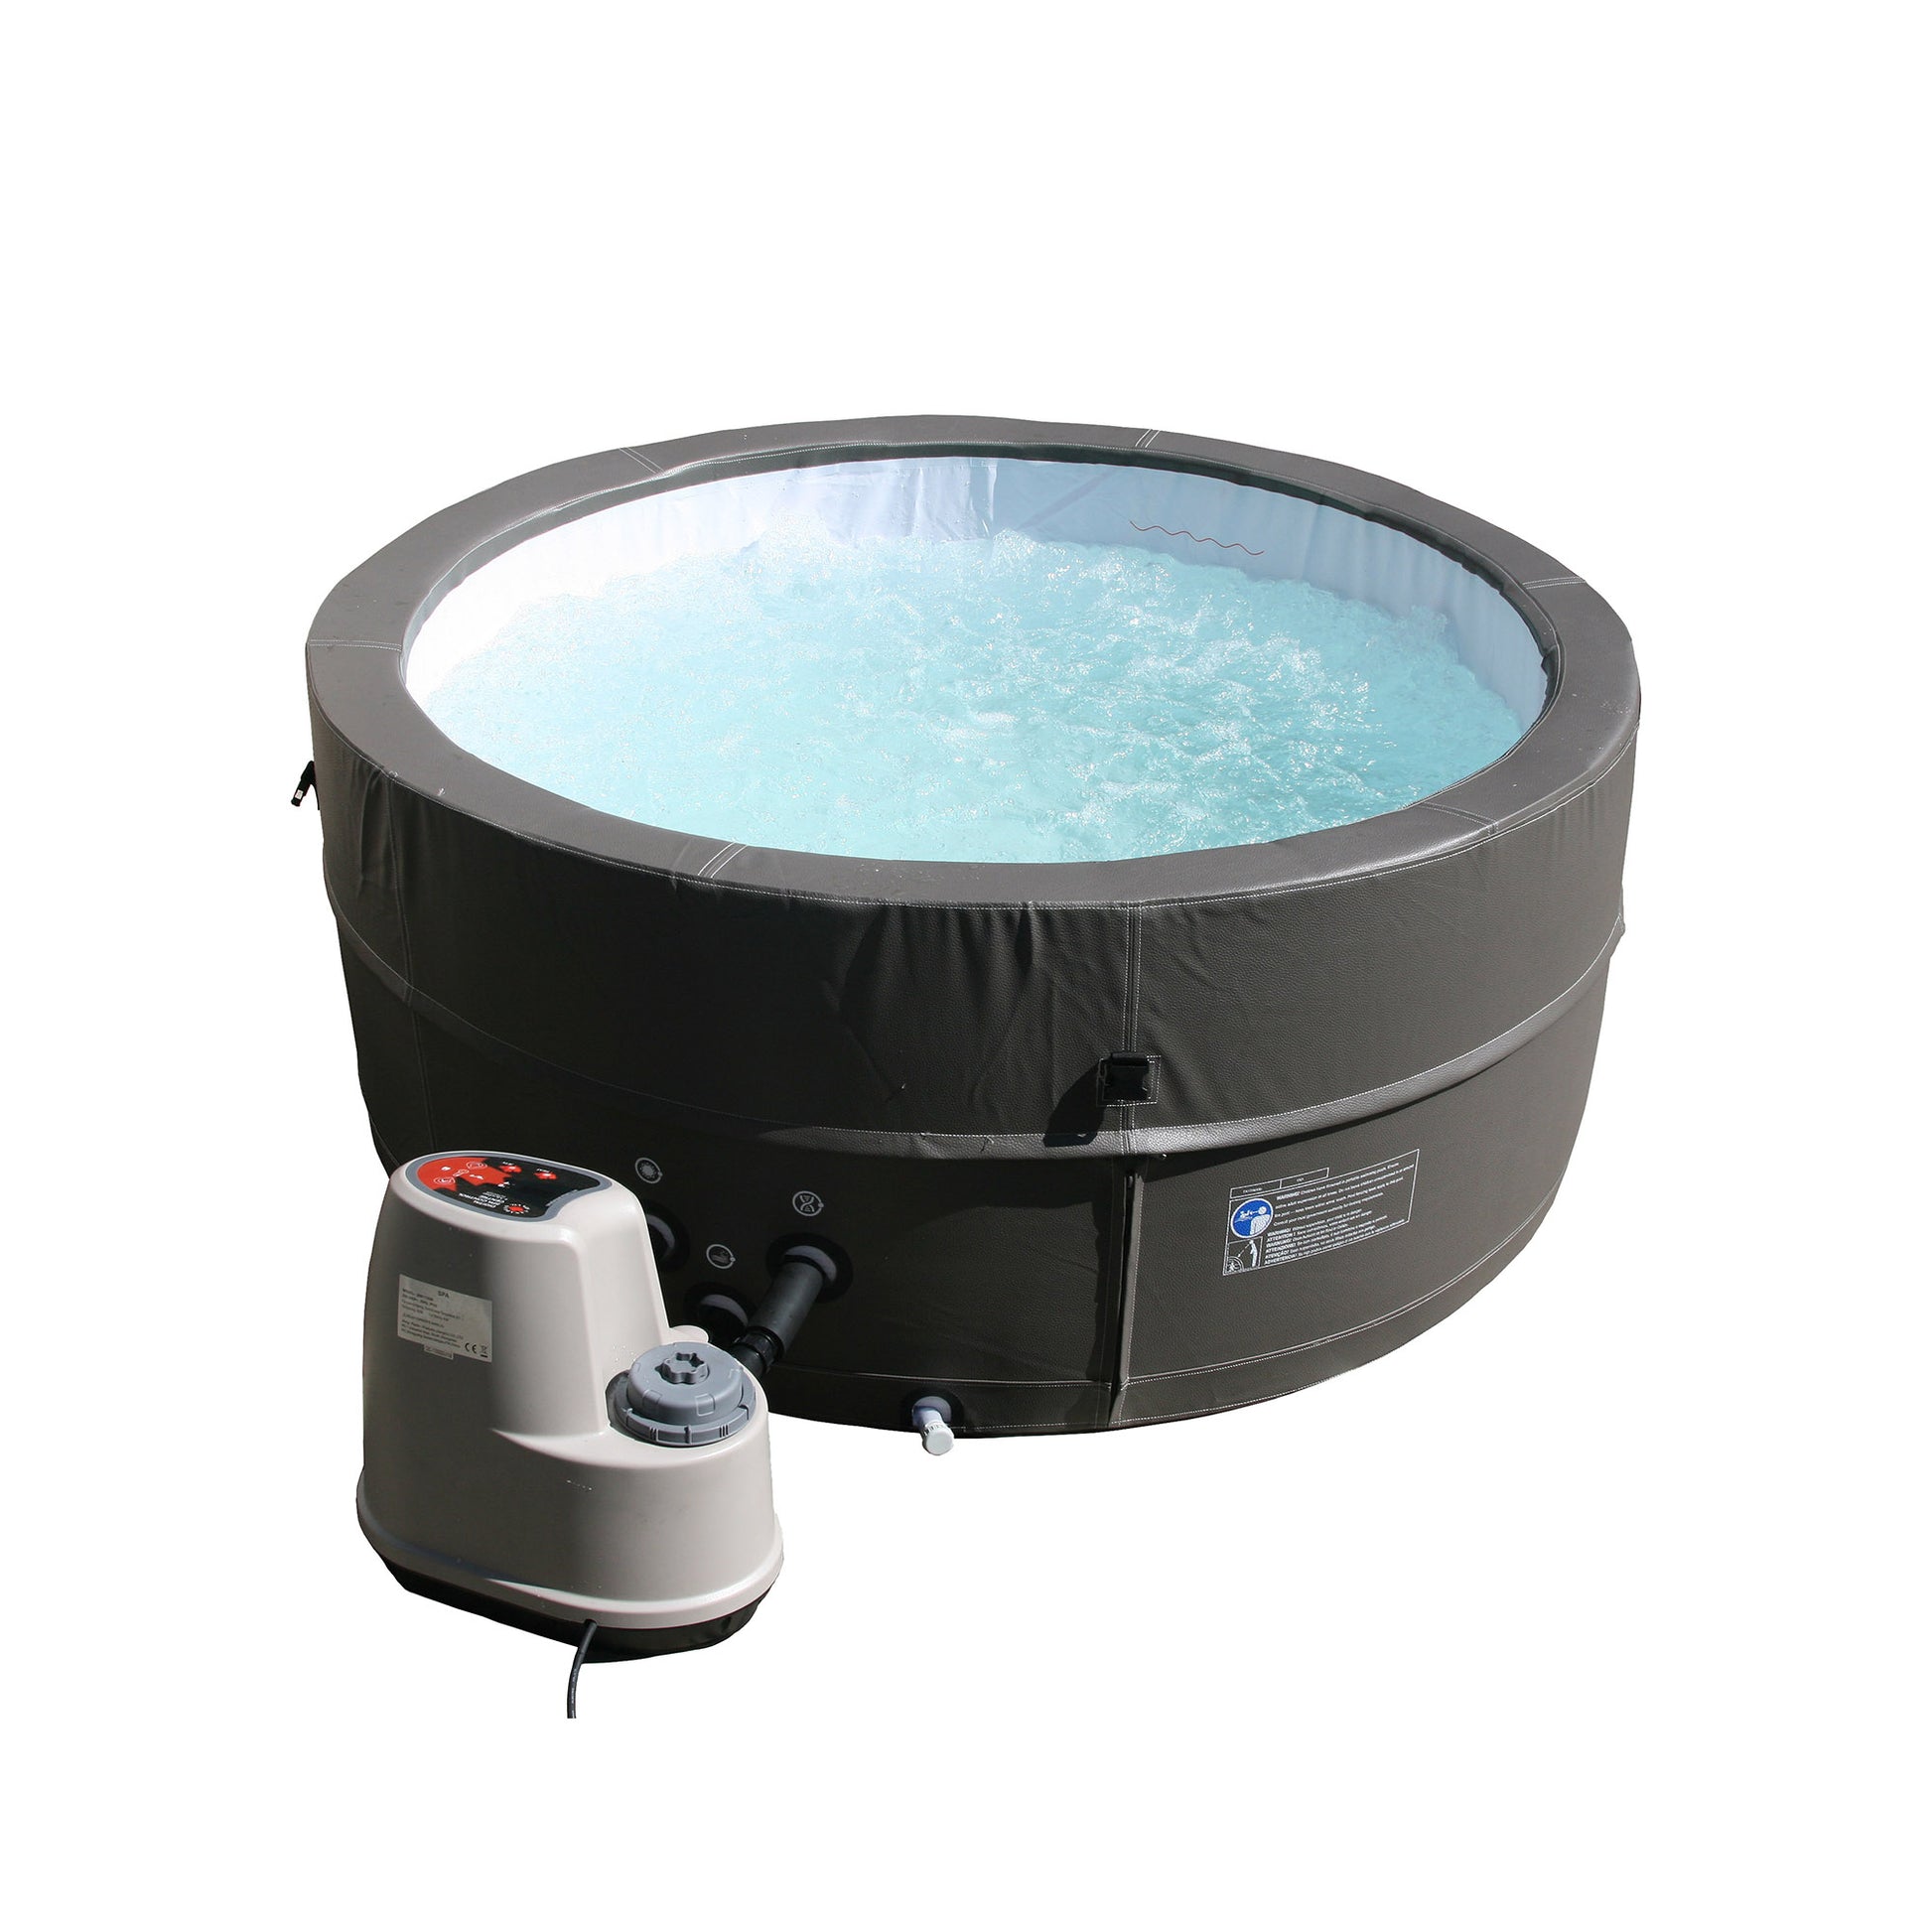 Canadian Spa Company_KK-10762_Replacement Vinyl Liner for Swift Current V2 Portable Spa._Hot Tubs